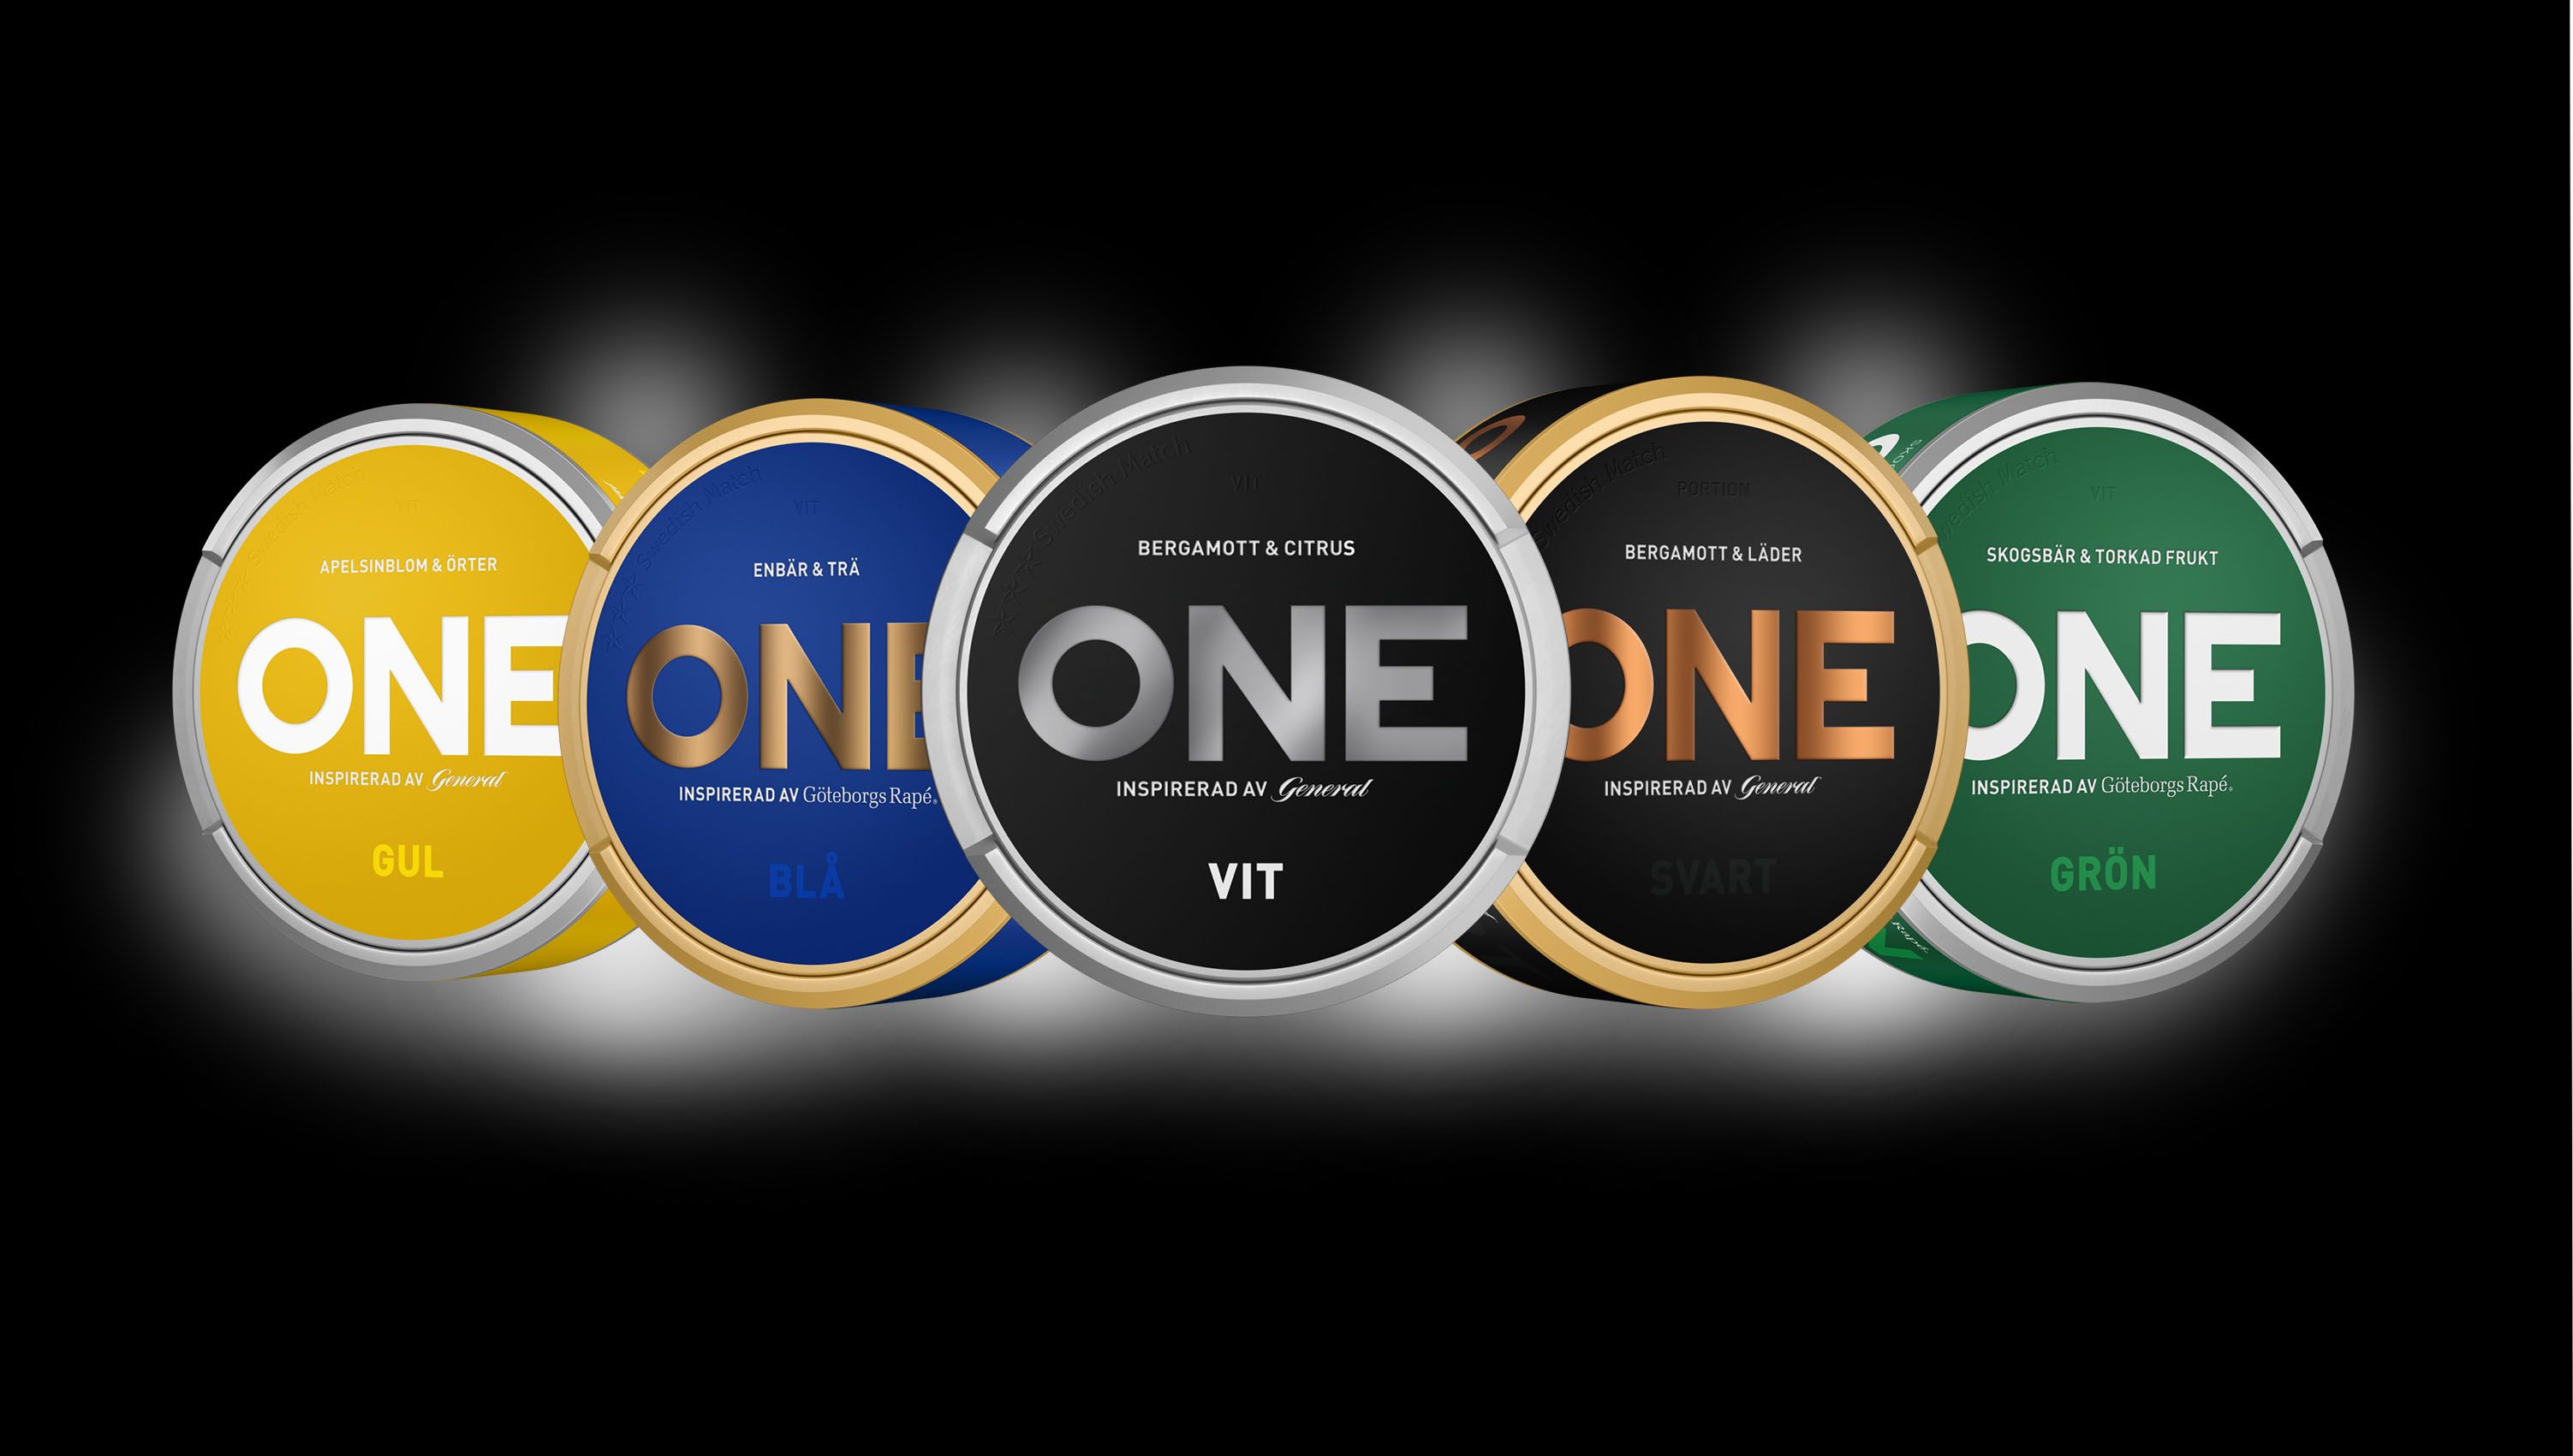 The new ONE snus